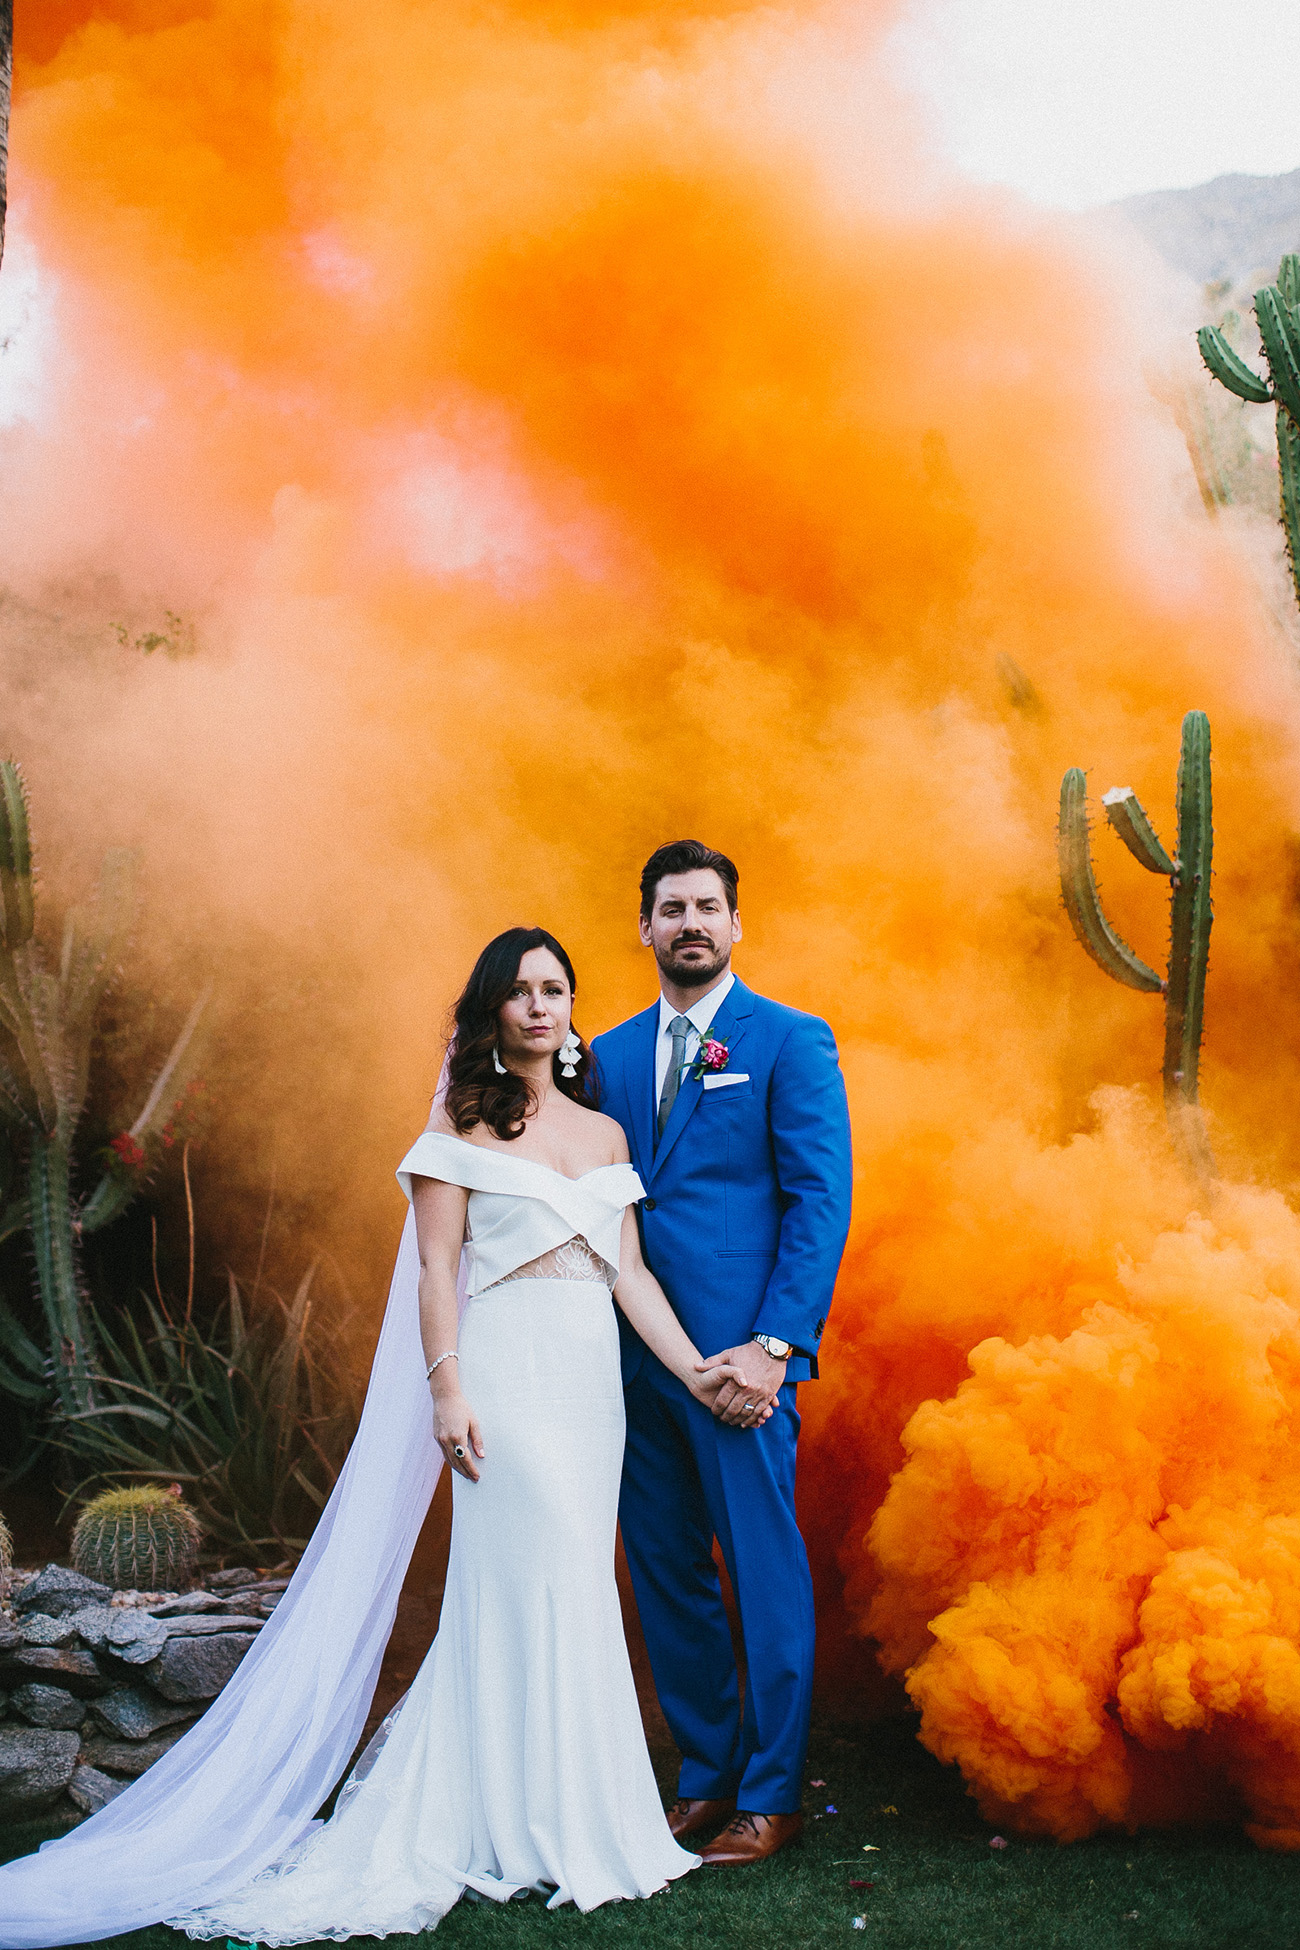 orange smoke creates an impression of a sunrise in the desert and adds color to the photo